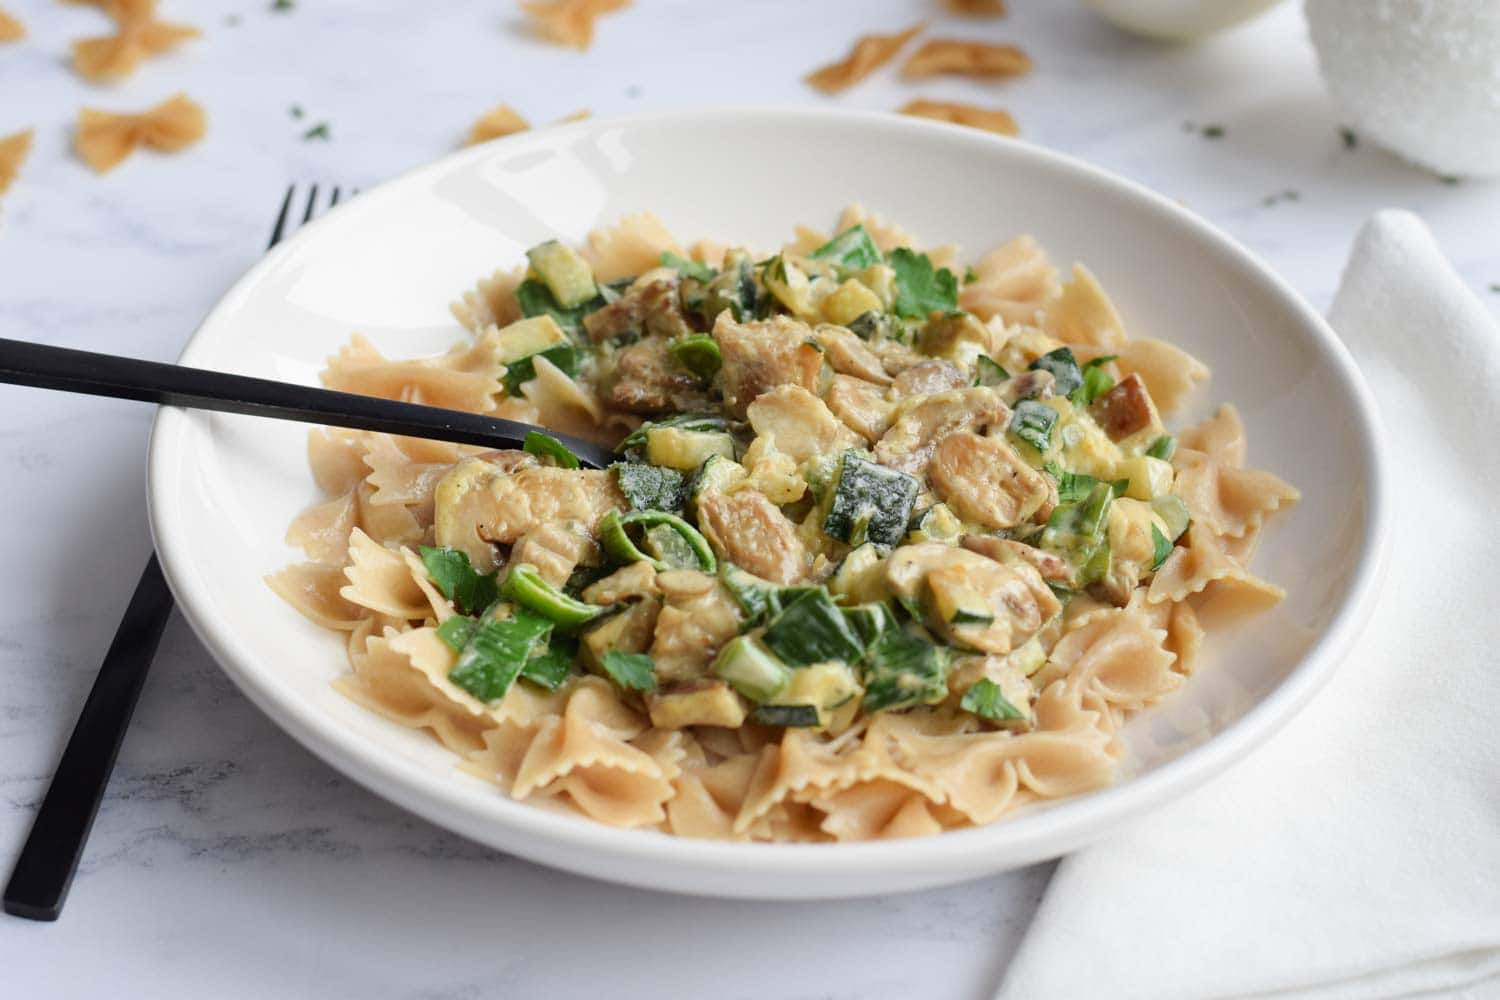 A plate of low FODMAP pasta with mushrooms in cream sauce